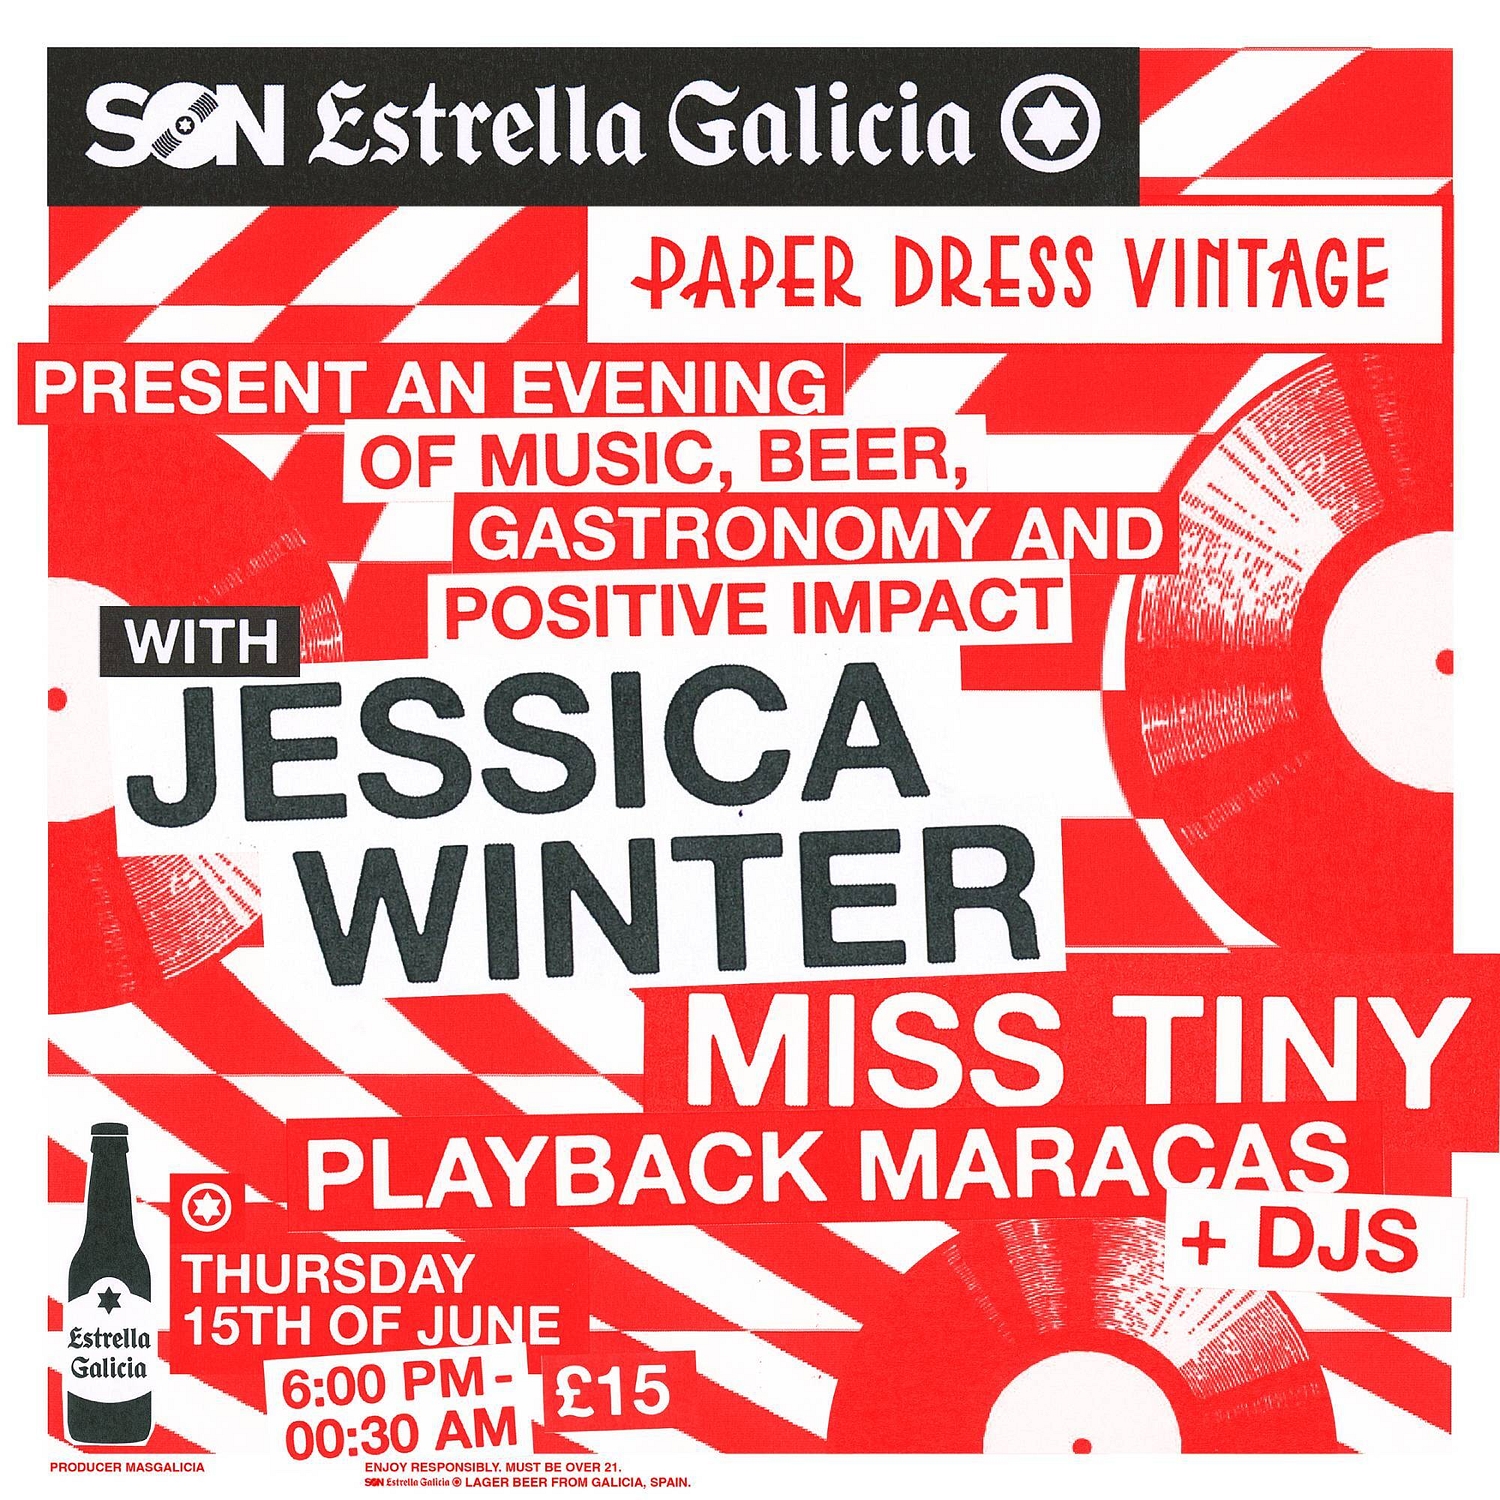 Jessica Winter, Miss Tiny and more to play third SON Estrella Galicia event in London